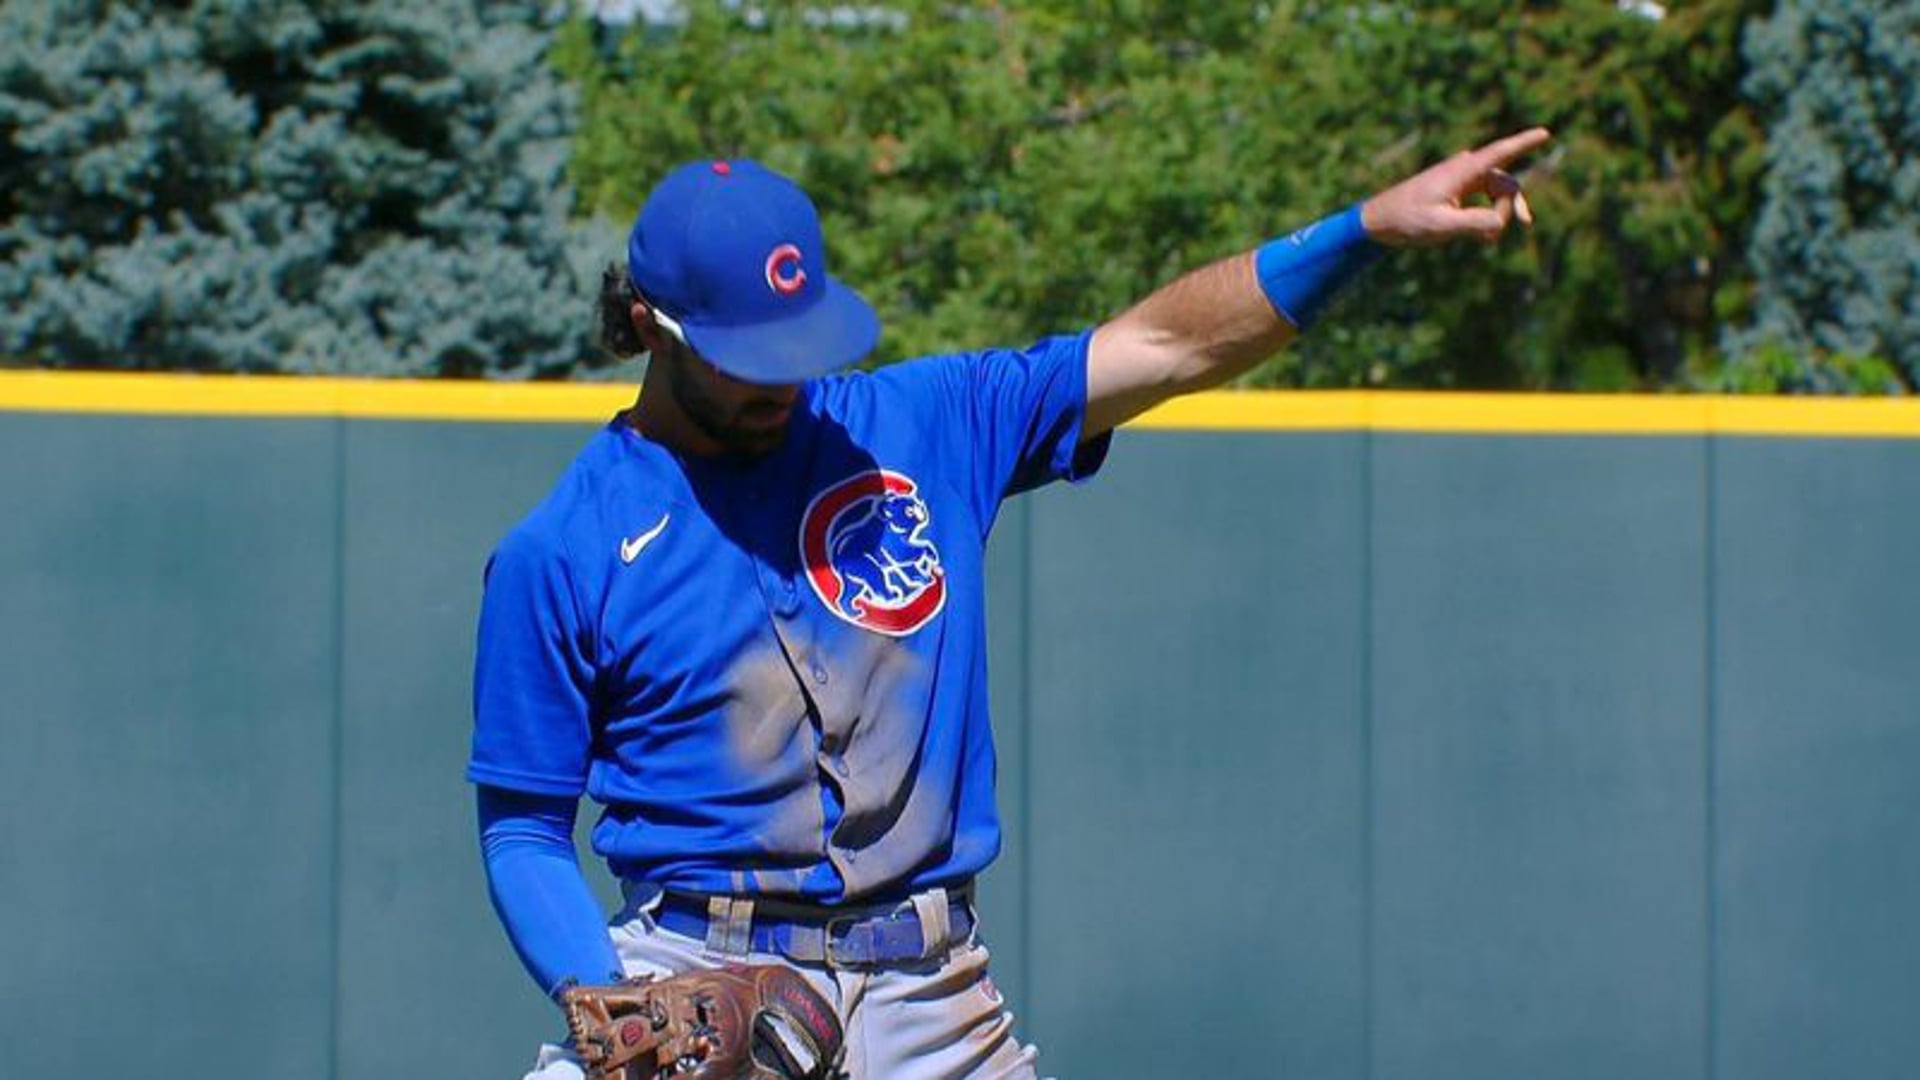 Nico Hoerner David Ross State Of Cubs Ss Image - Marquee Sports Network